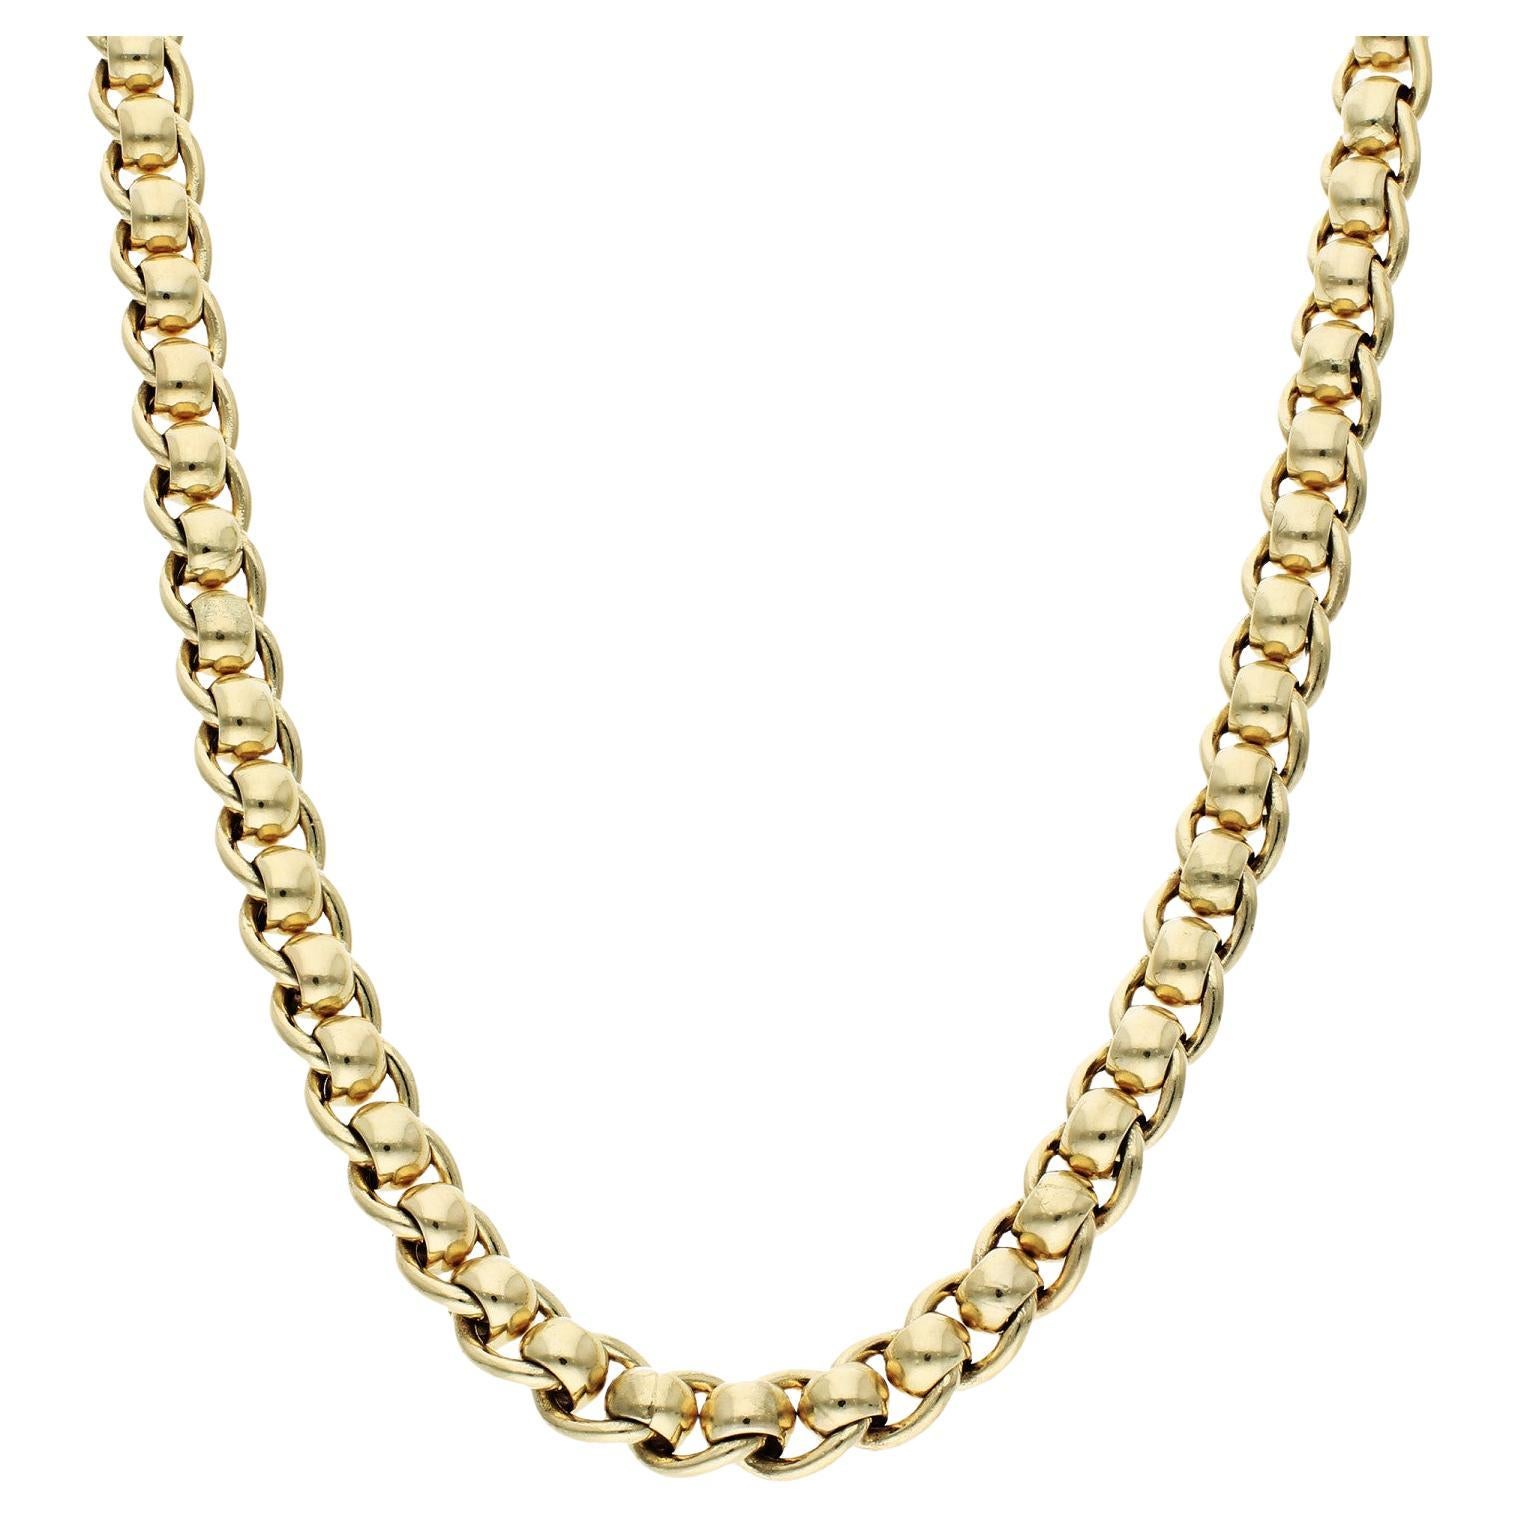 9ct Yellow Gold 18.50 Inch Roller Ball Chain 69.0 grams